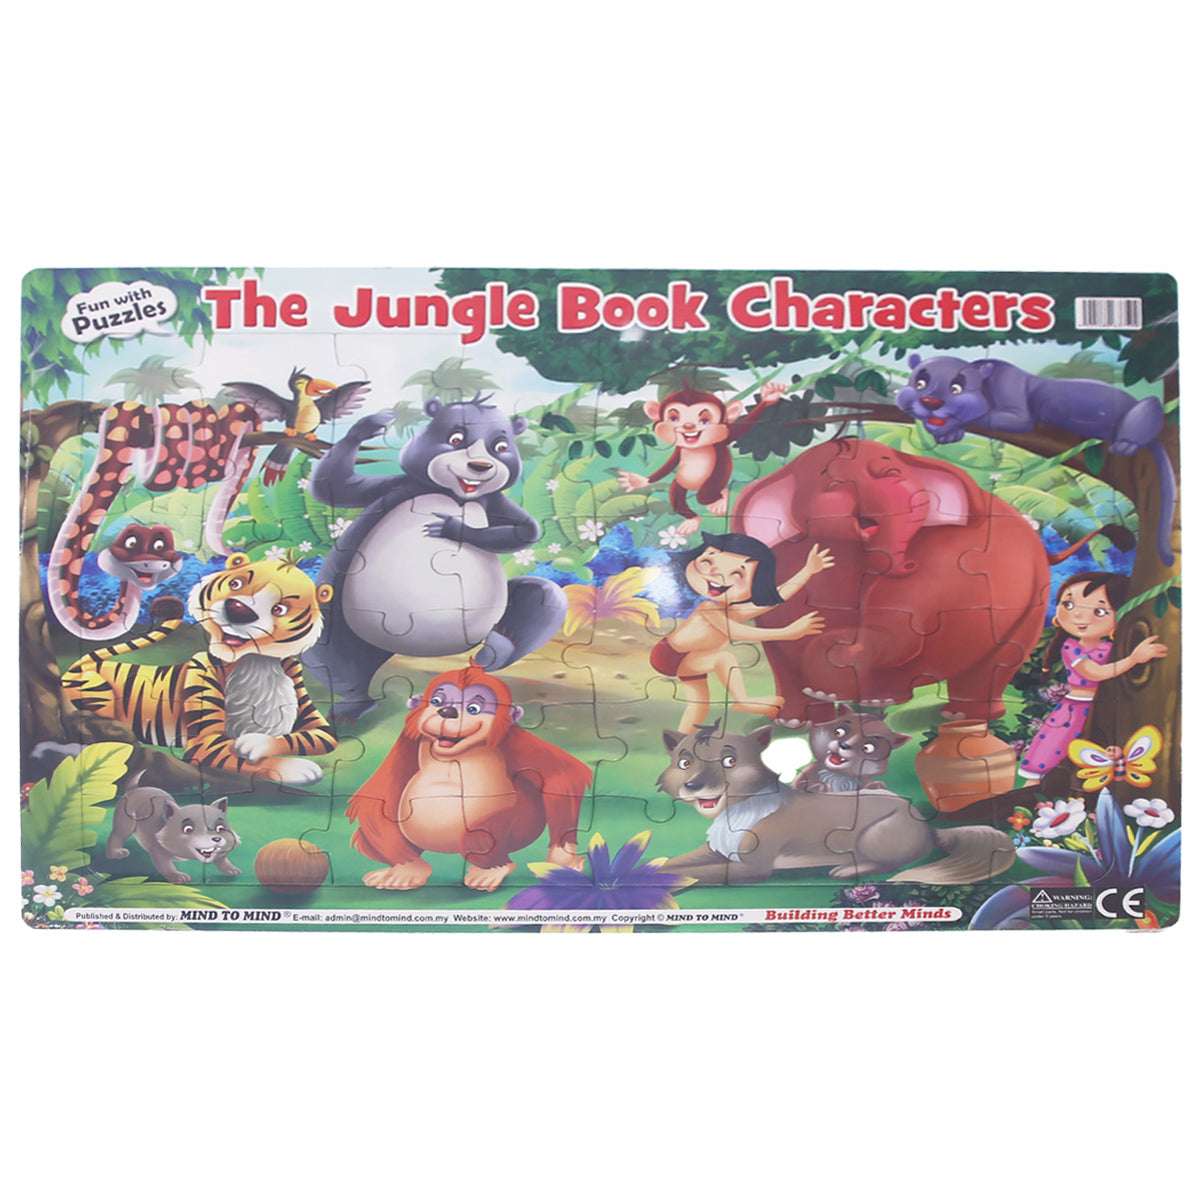 THE JUNGLE BK CHARACTERS. 9555480637594